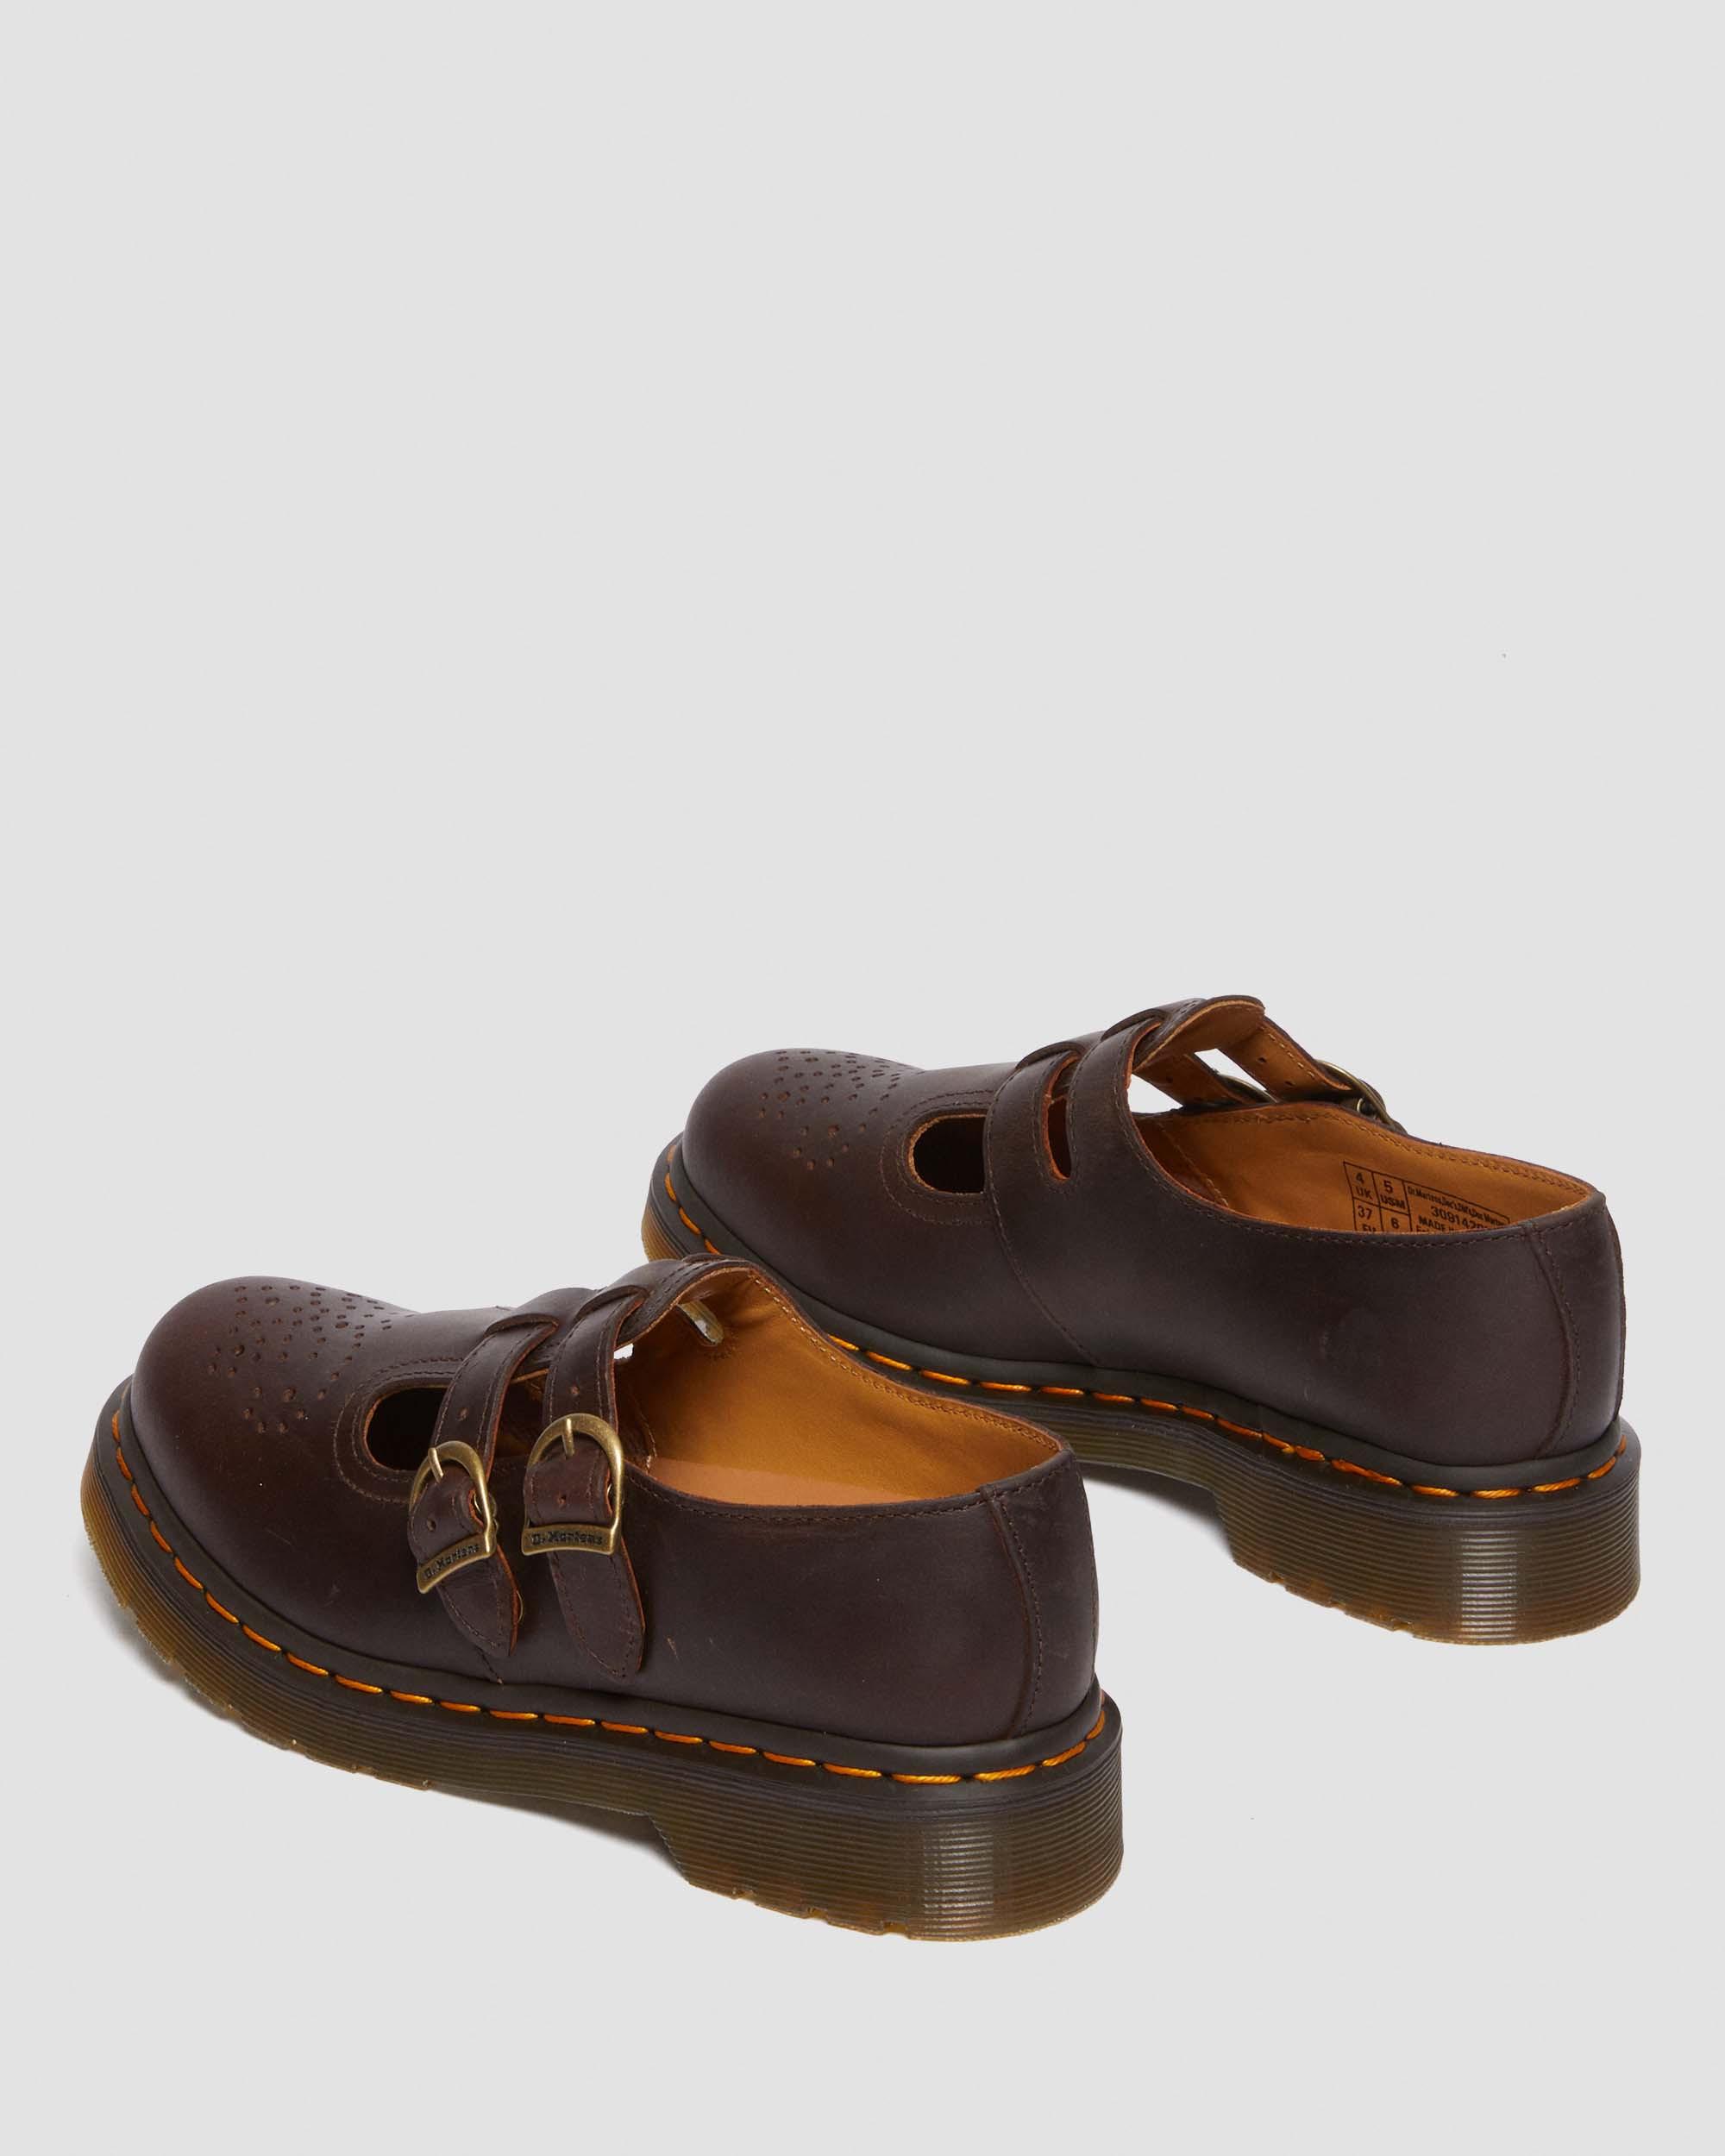 8065 Crazy Horse Leather Mary Jane Shoes | Dr. Martens